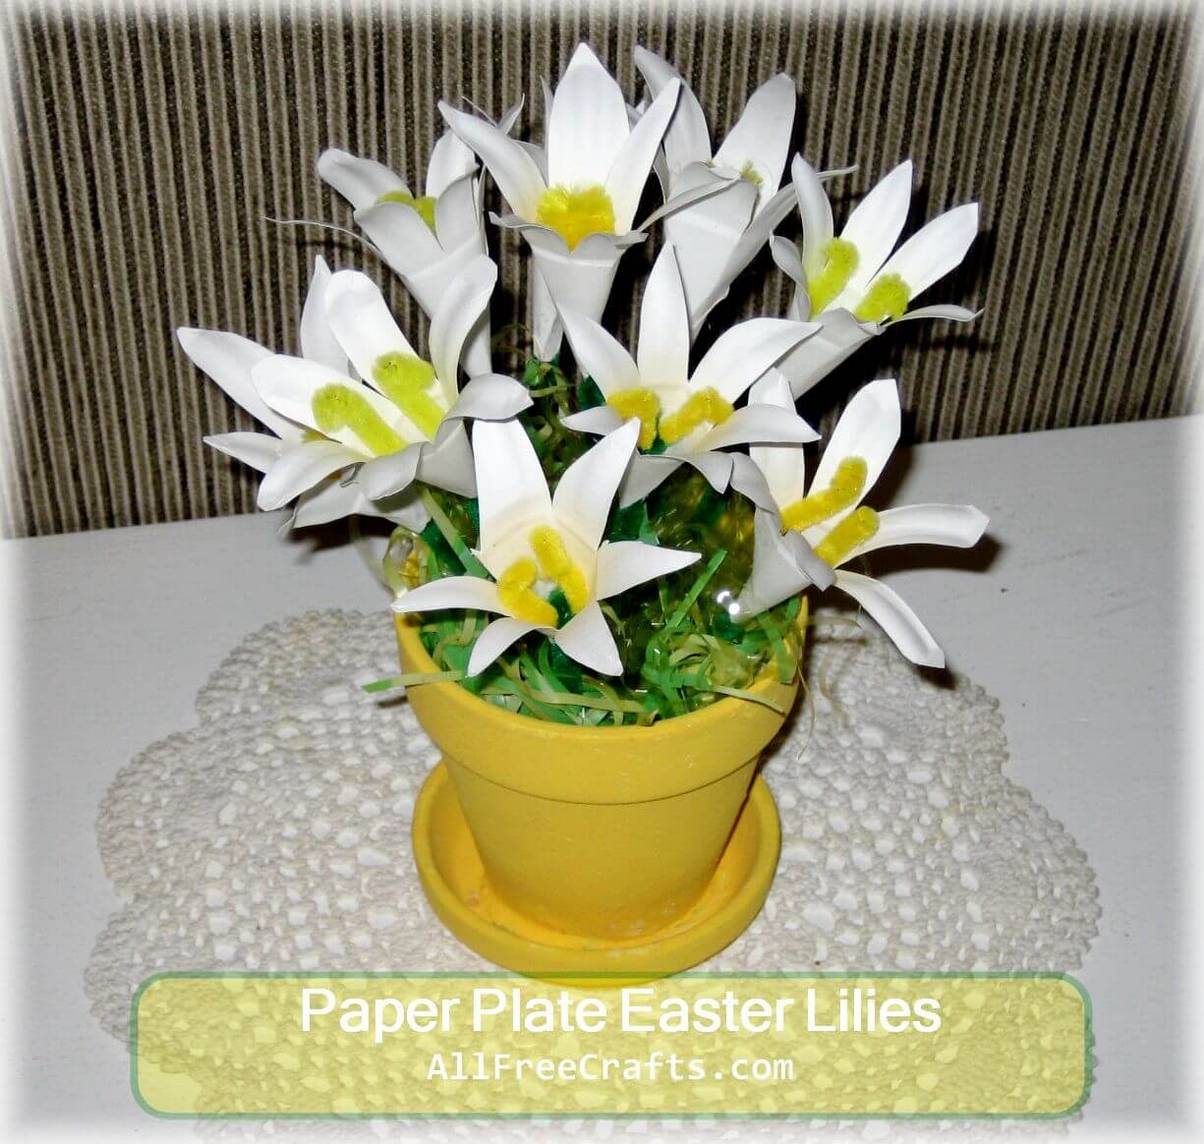 Paper Plate Easter Lilies